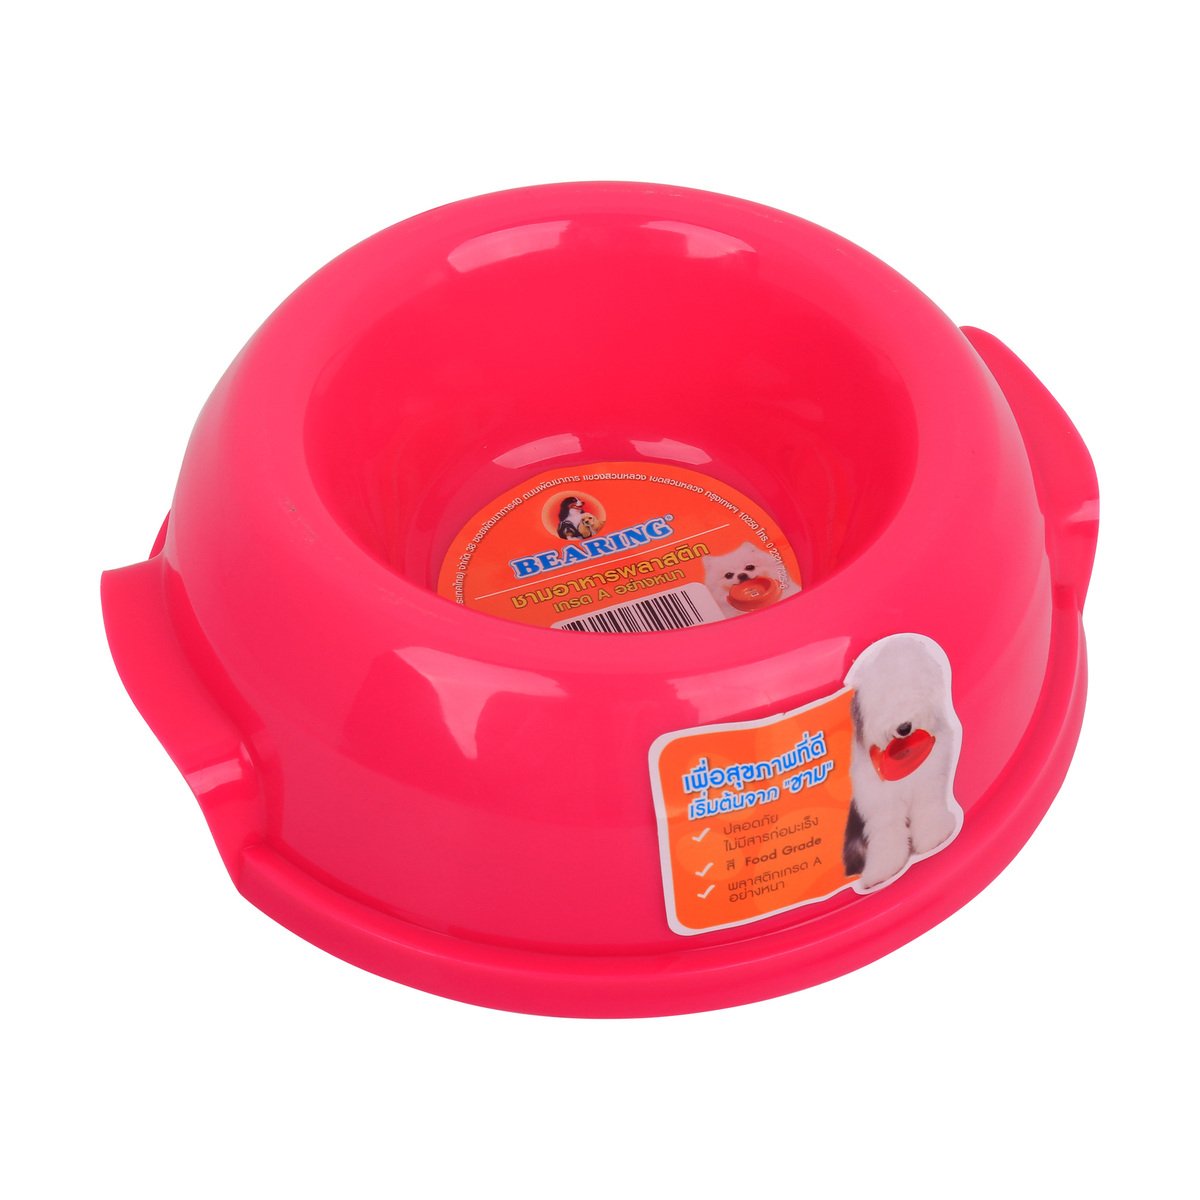 Bearing Pet Bowl, Round, Size Small, Assorted, 1 pc